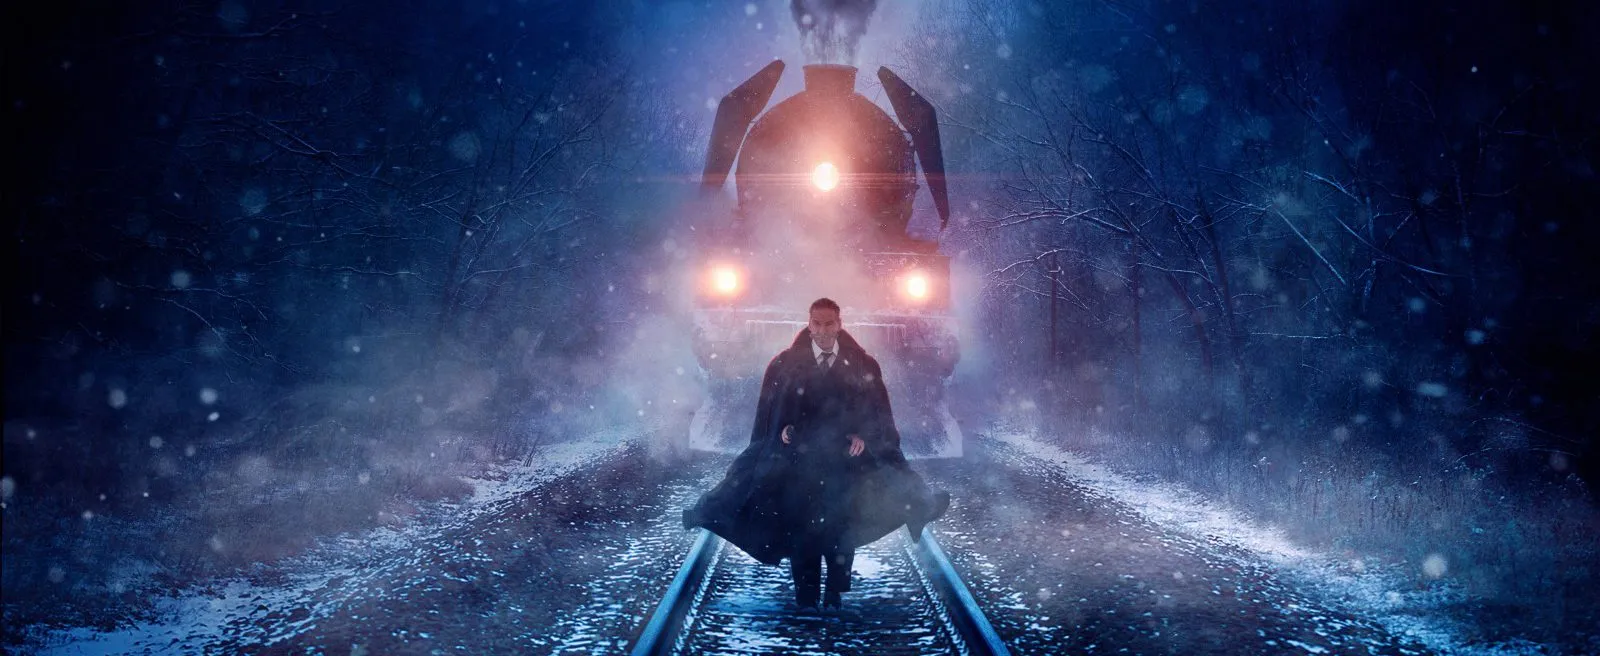 All Aboard the Orient Express A Look at the Cast and Trailer of the Movie